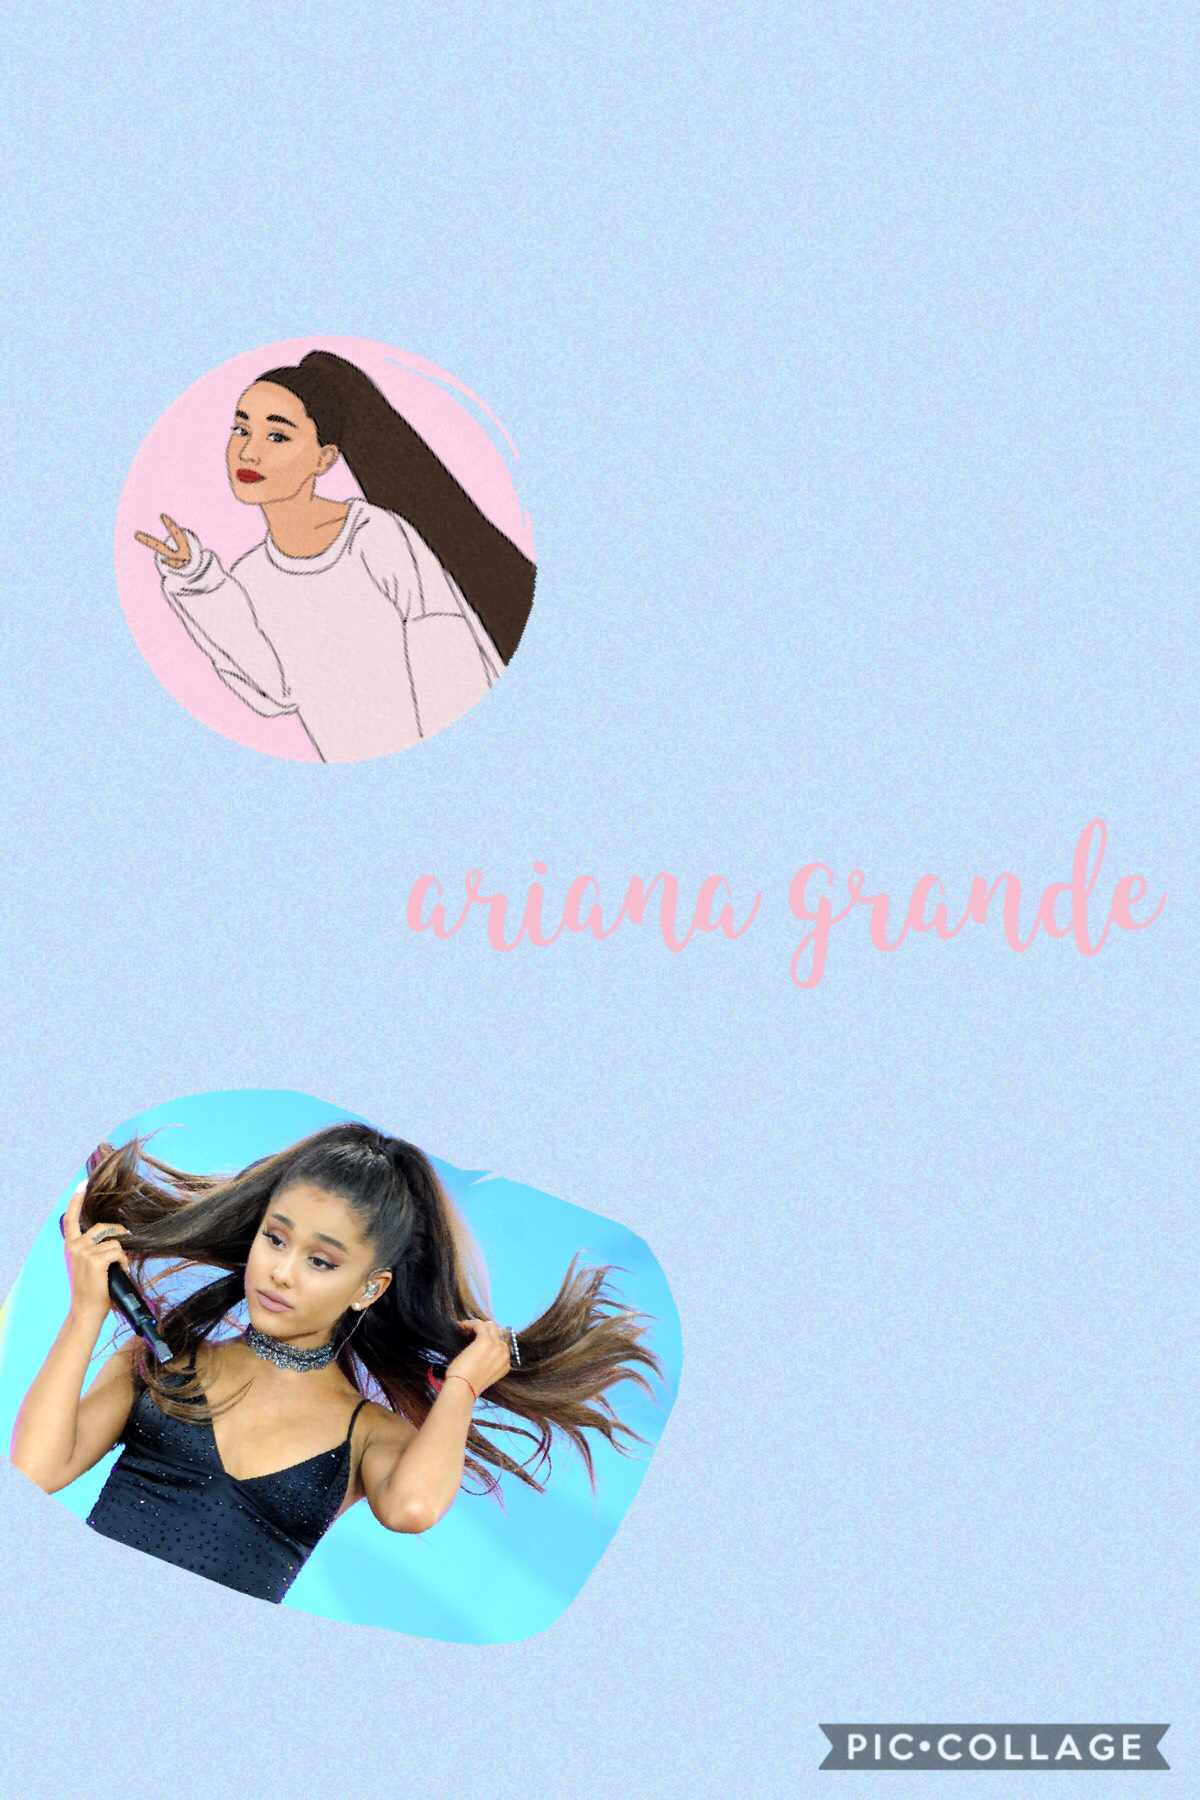 So ou love ariana grande comment down below if you do